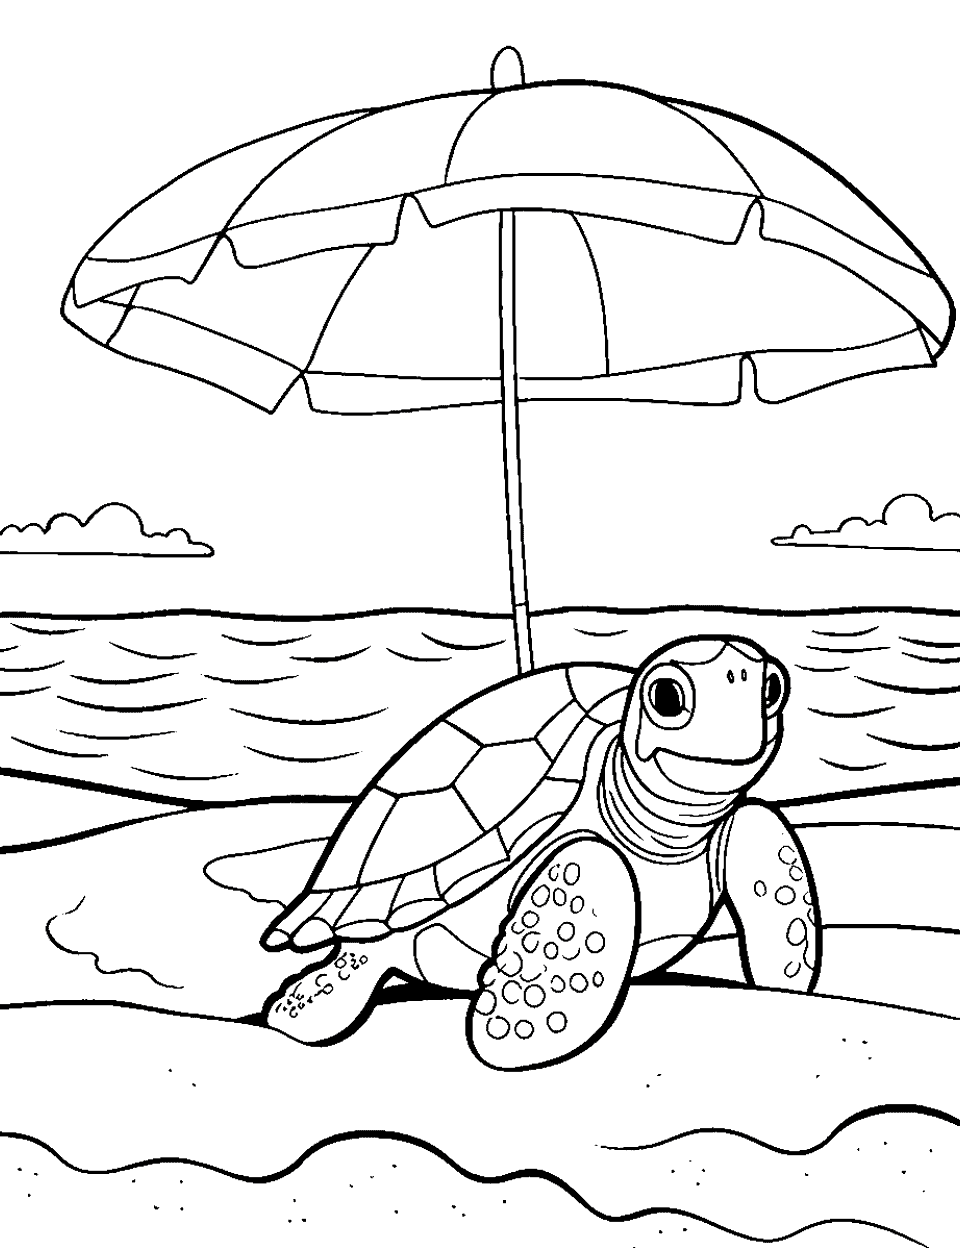 Beach Fun Turtle Coloring Page - A turtle enjoying a day on the beach.